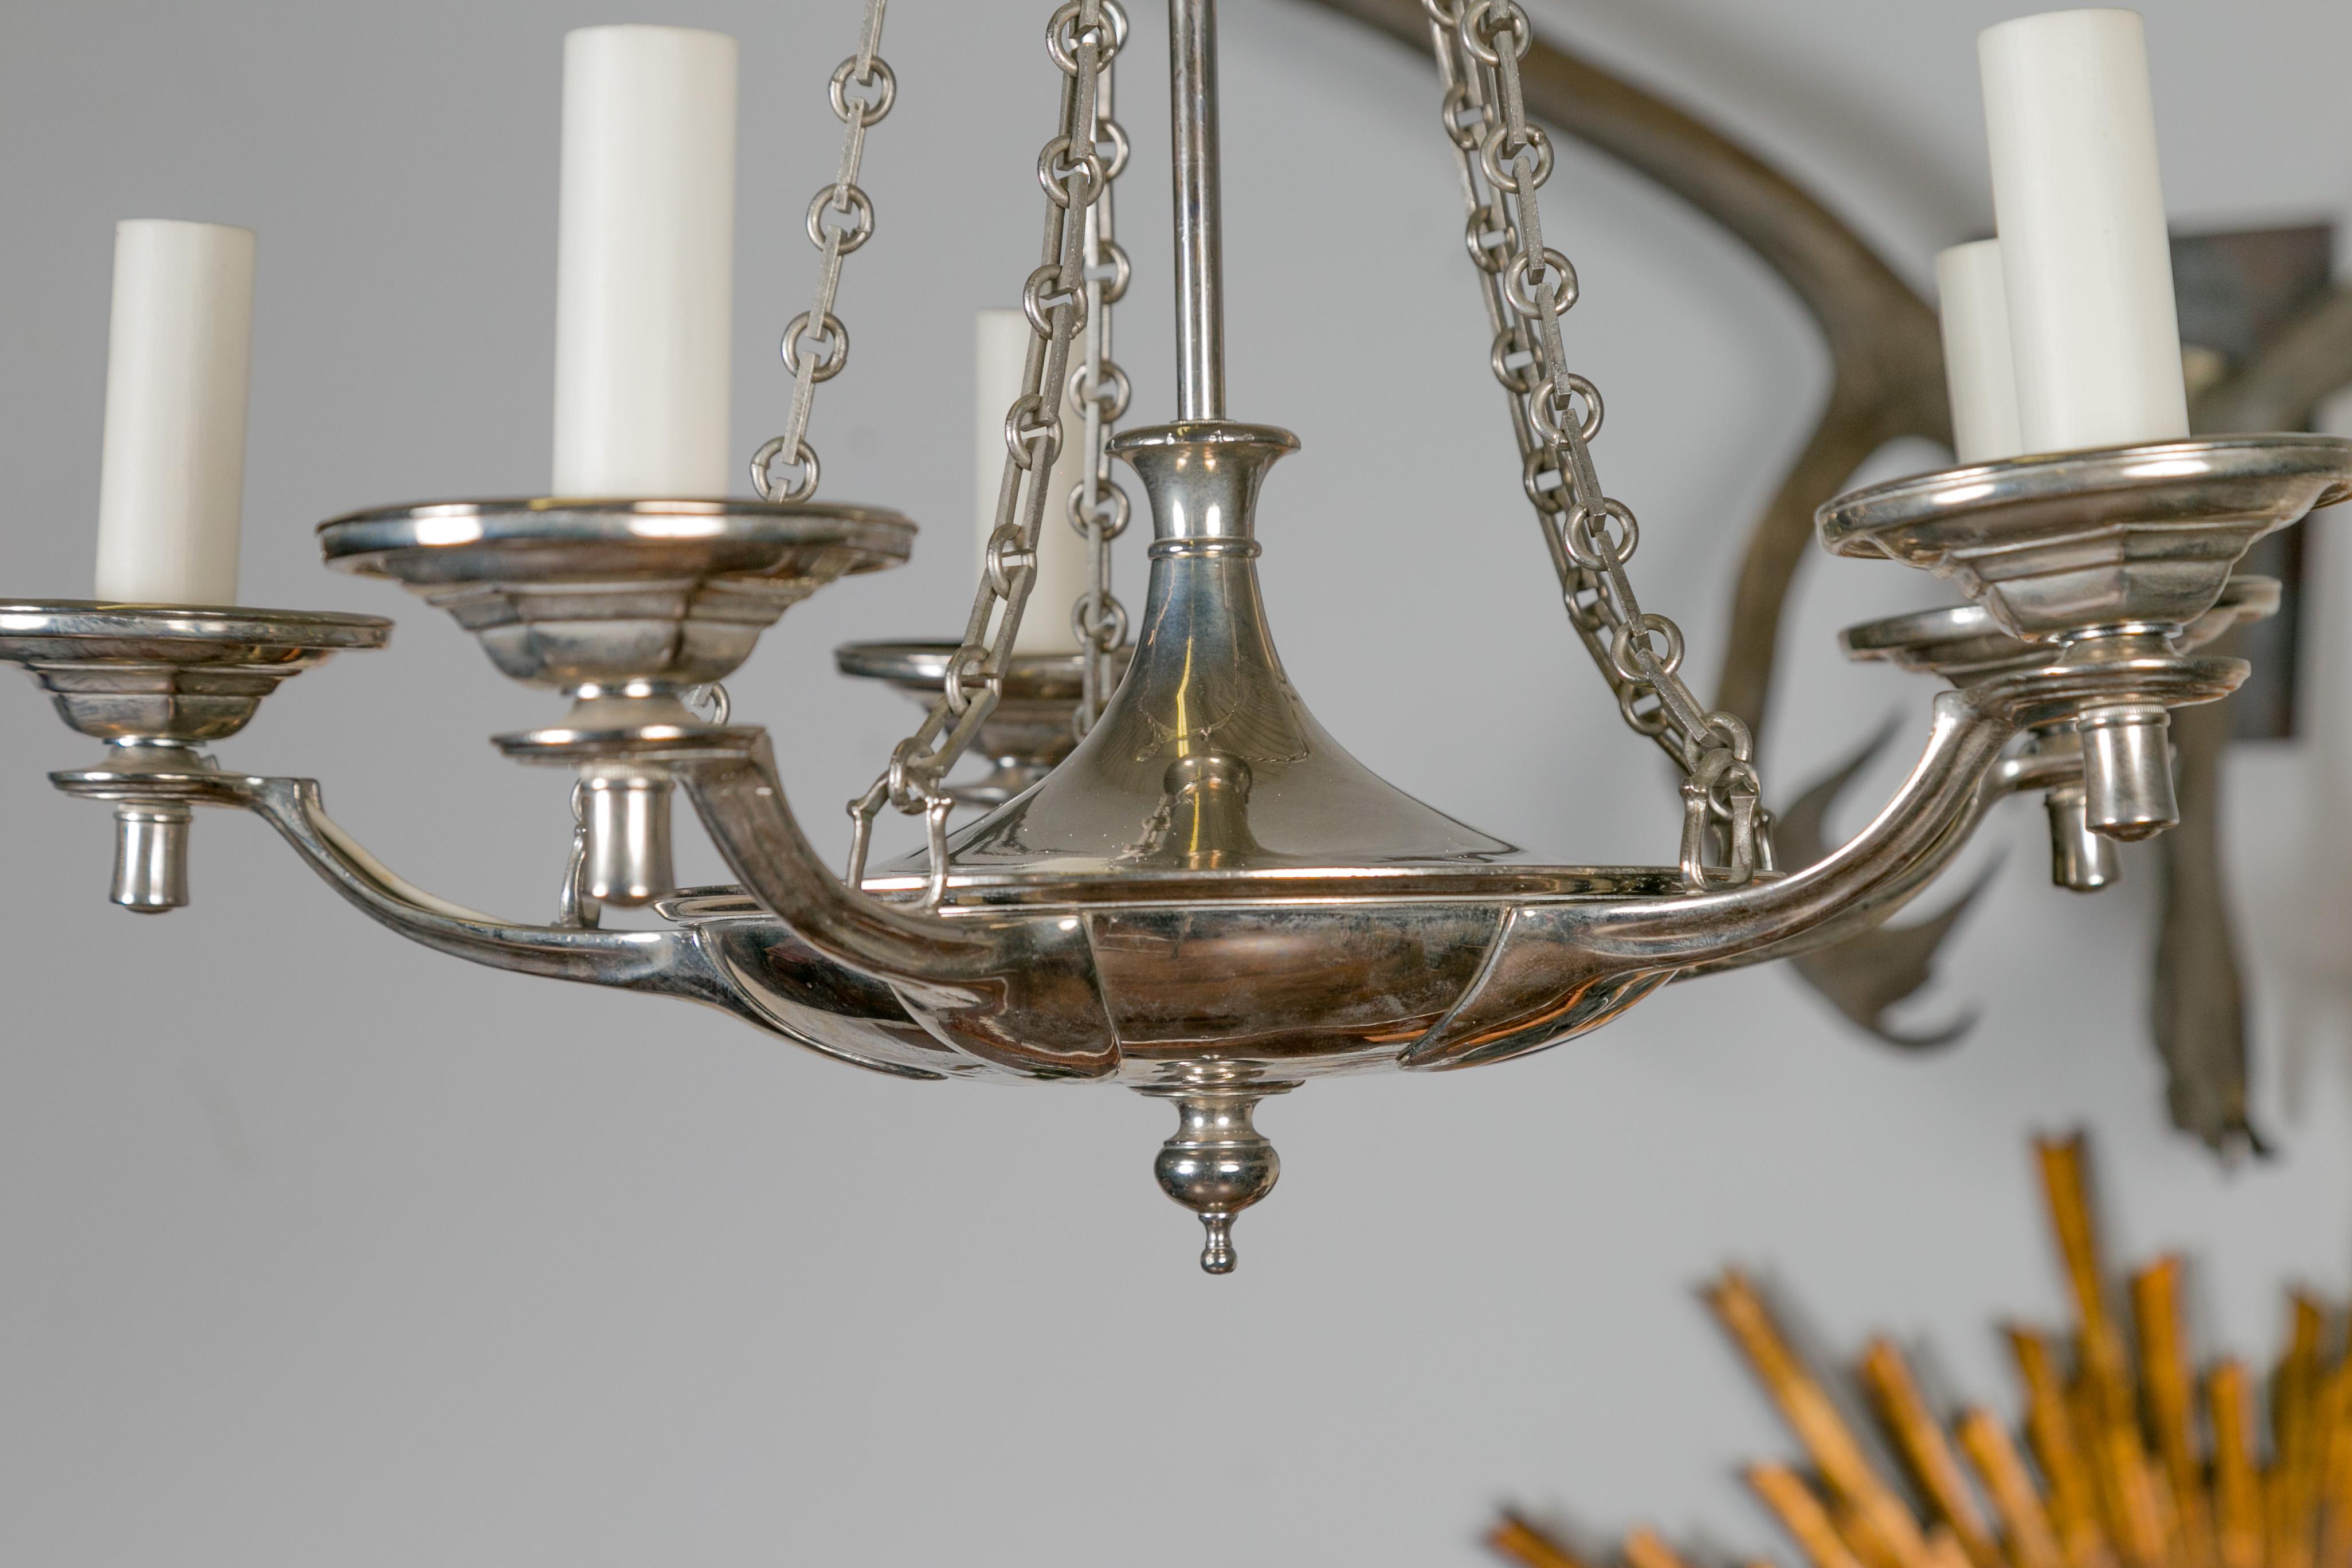 Mid-Century Modern English Vintage Five-Light Nickel Chandelier with Profiled Links, circa 1970 For Sale